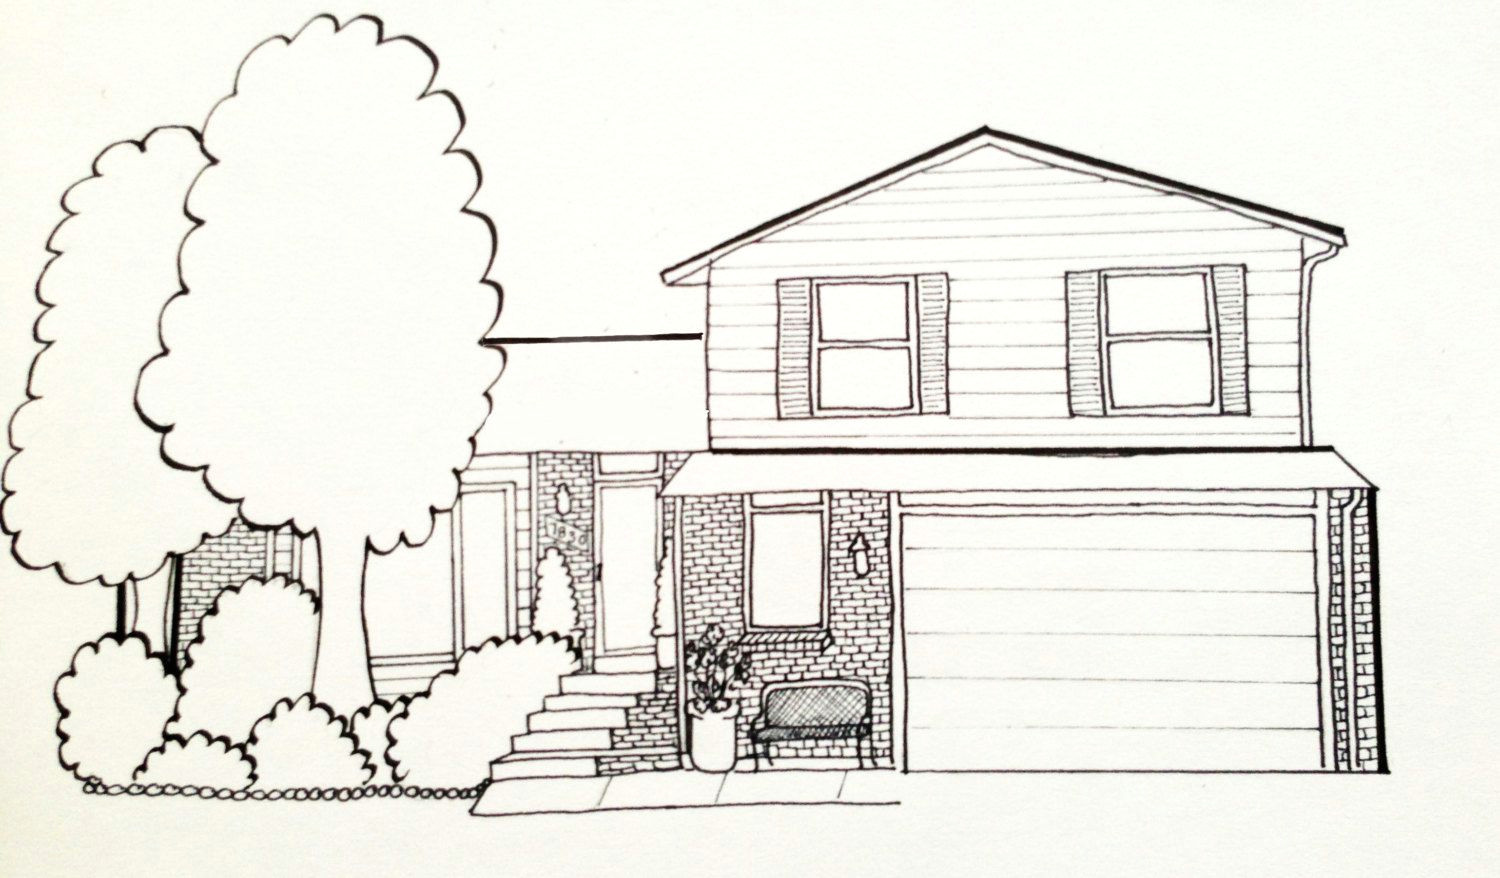 Drawing Cartoons House Custom House Drawing and Stationary 35 00 Via Etsy This is My